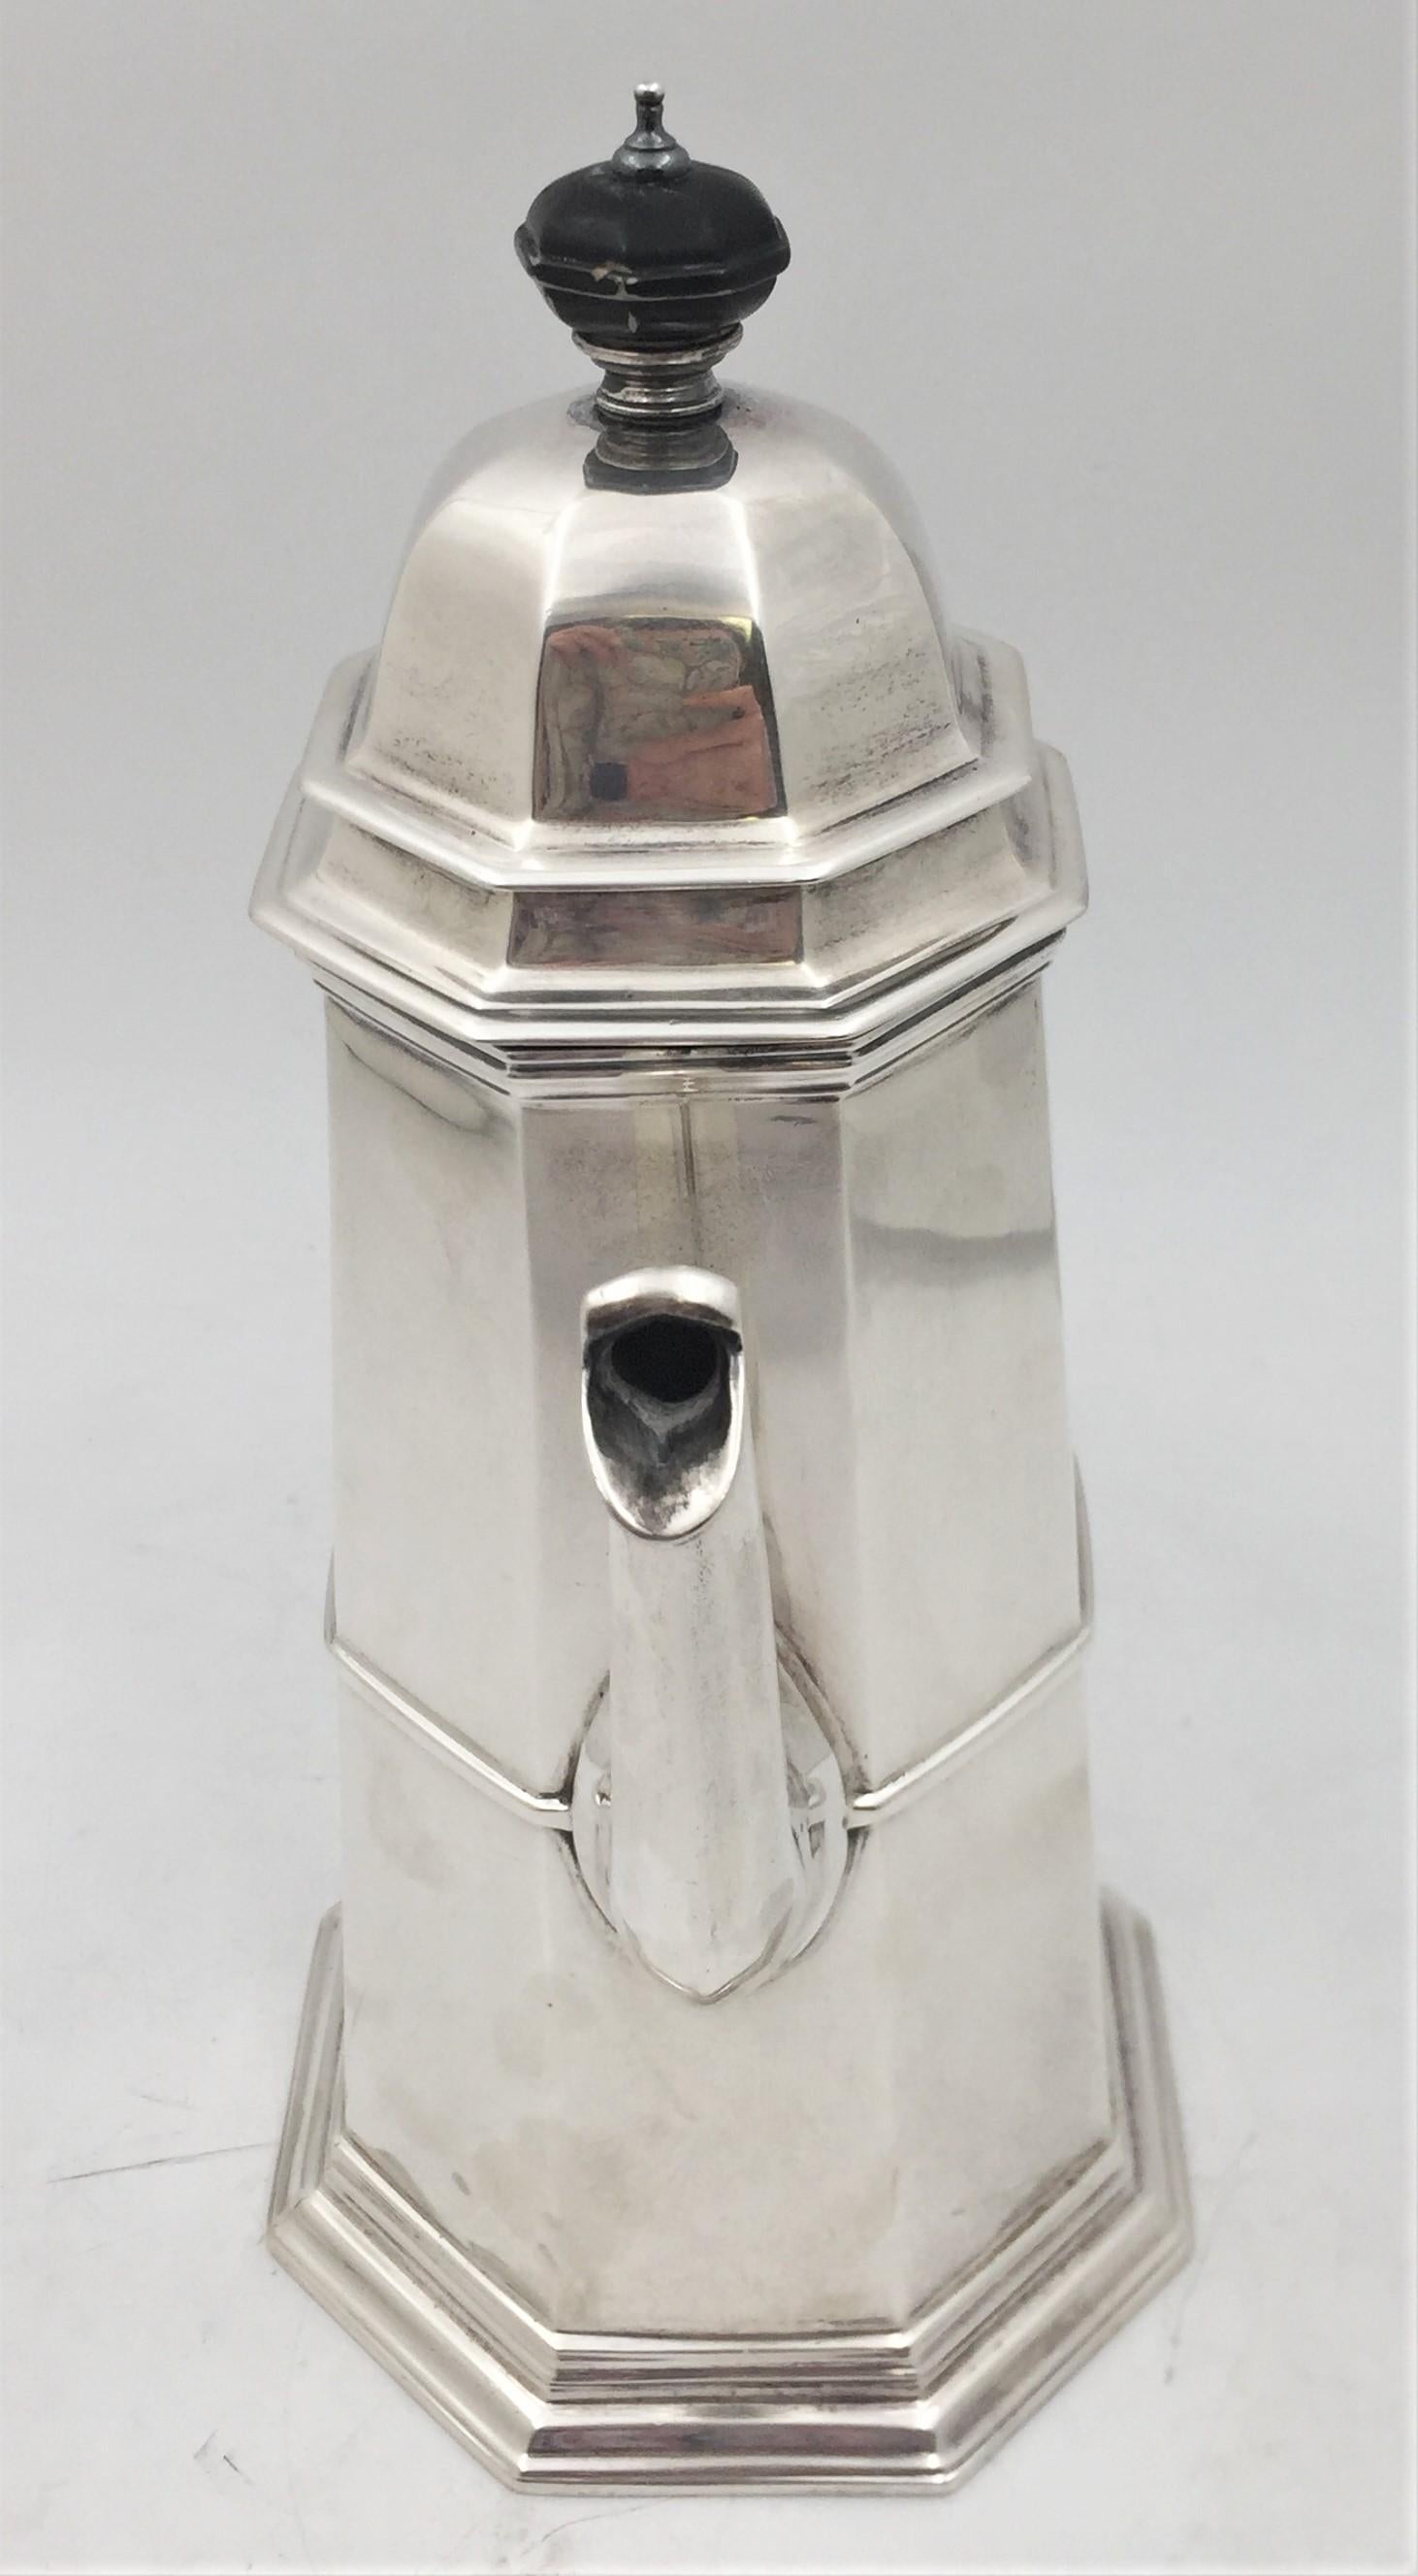 Adie Brothers, English, sterling silver lighthouse coffee pot from 1954. It measures 11 1/2'' in height by 8 3/4'' from handle to spout by 5'' in diameter at the base, weighs 36.9 troy ounces, and bears hallmarks as shown. 

The firm Adie Brothers